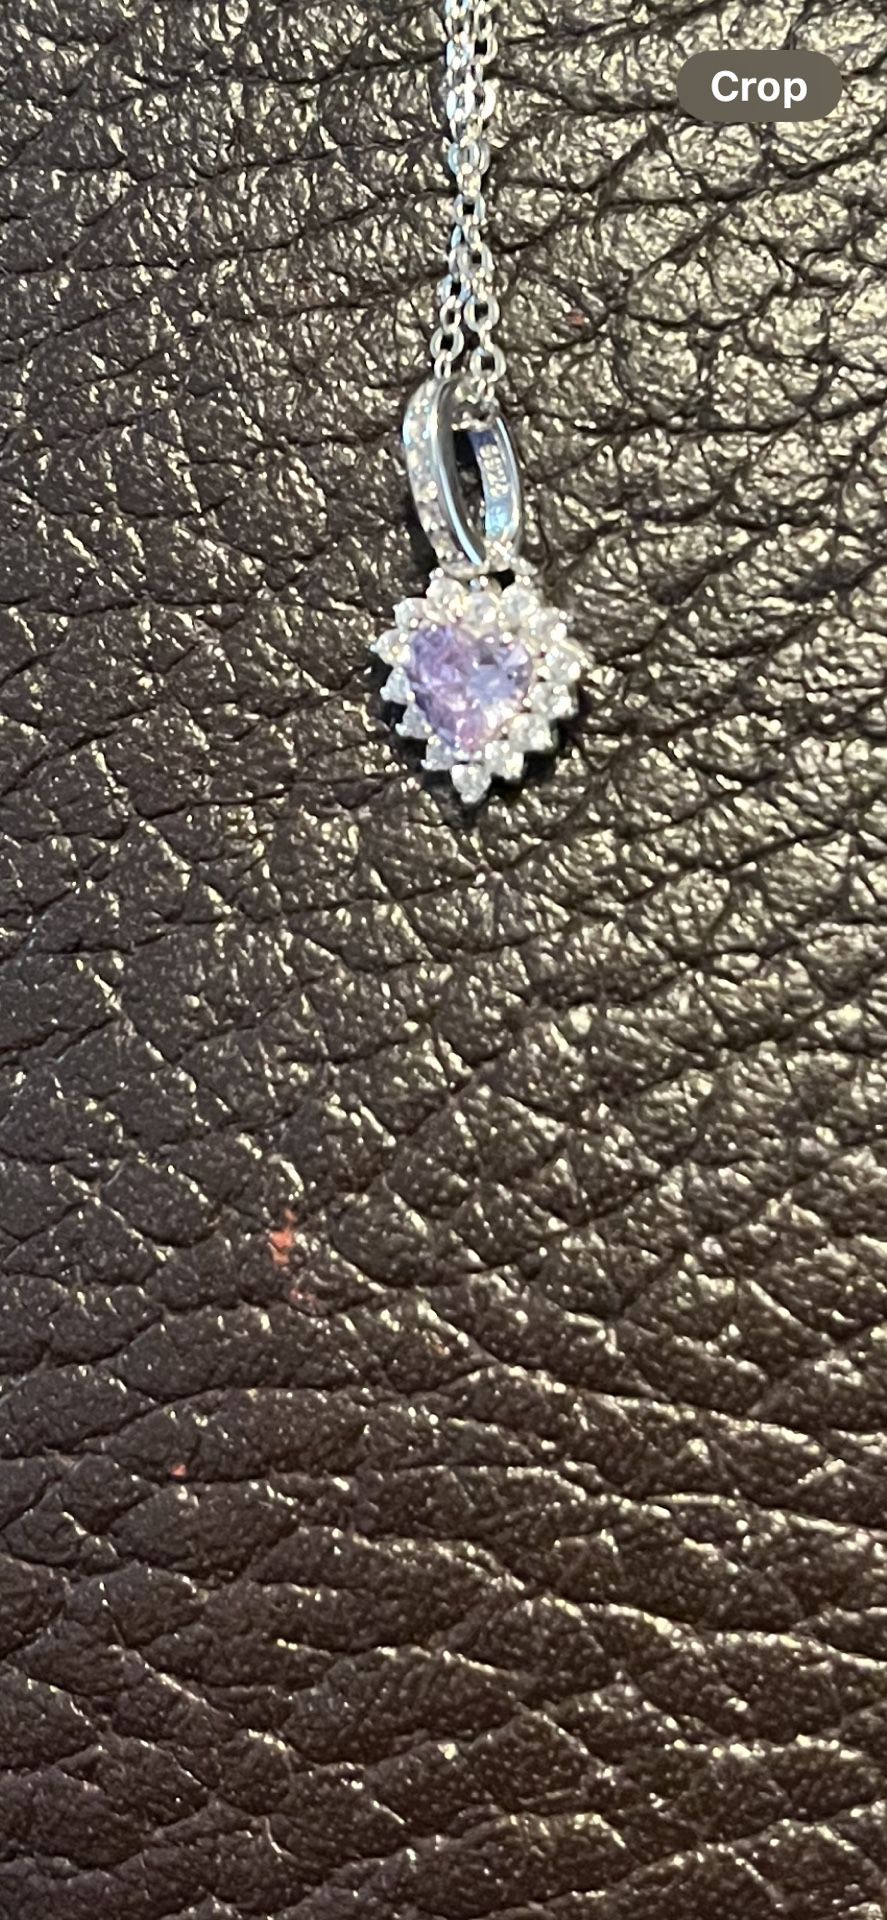 Lavender And Cubic Zirconia Dainty Necklace W Adjustable Sterling Silver Chain. Pu Bridgewater New In Bag